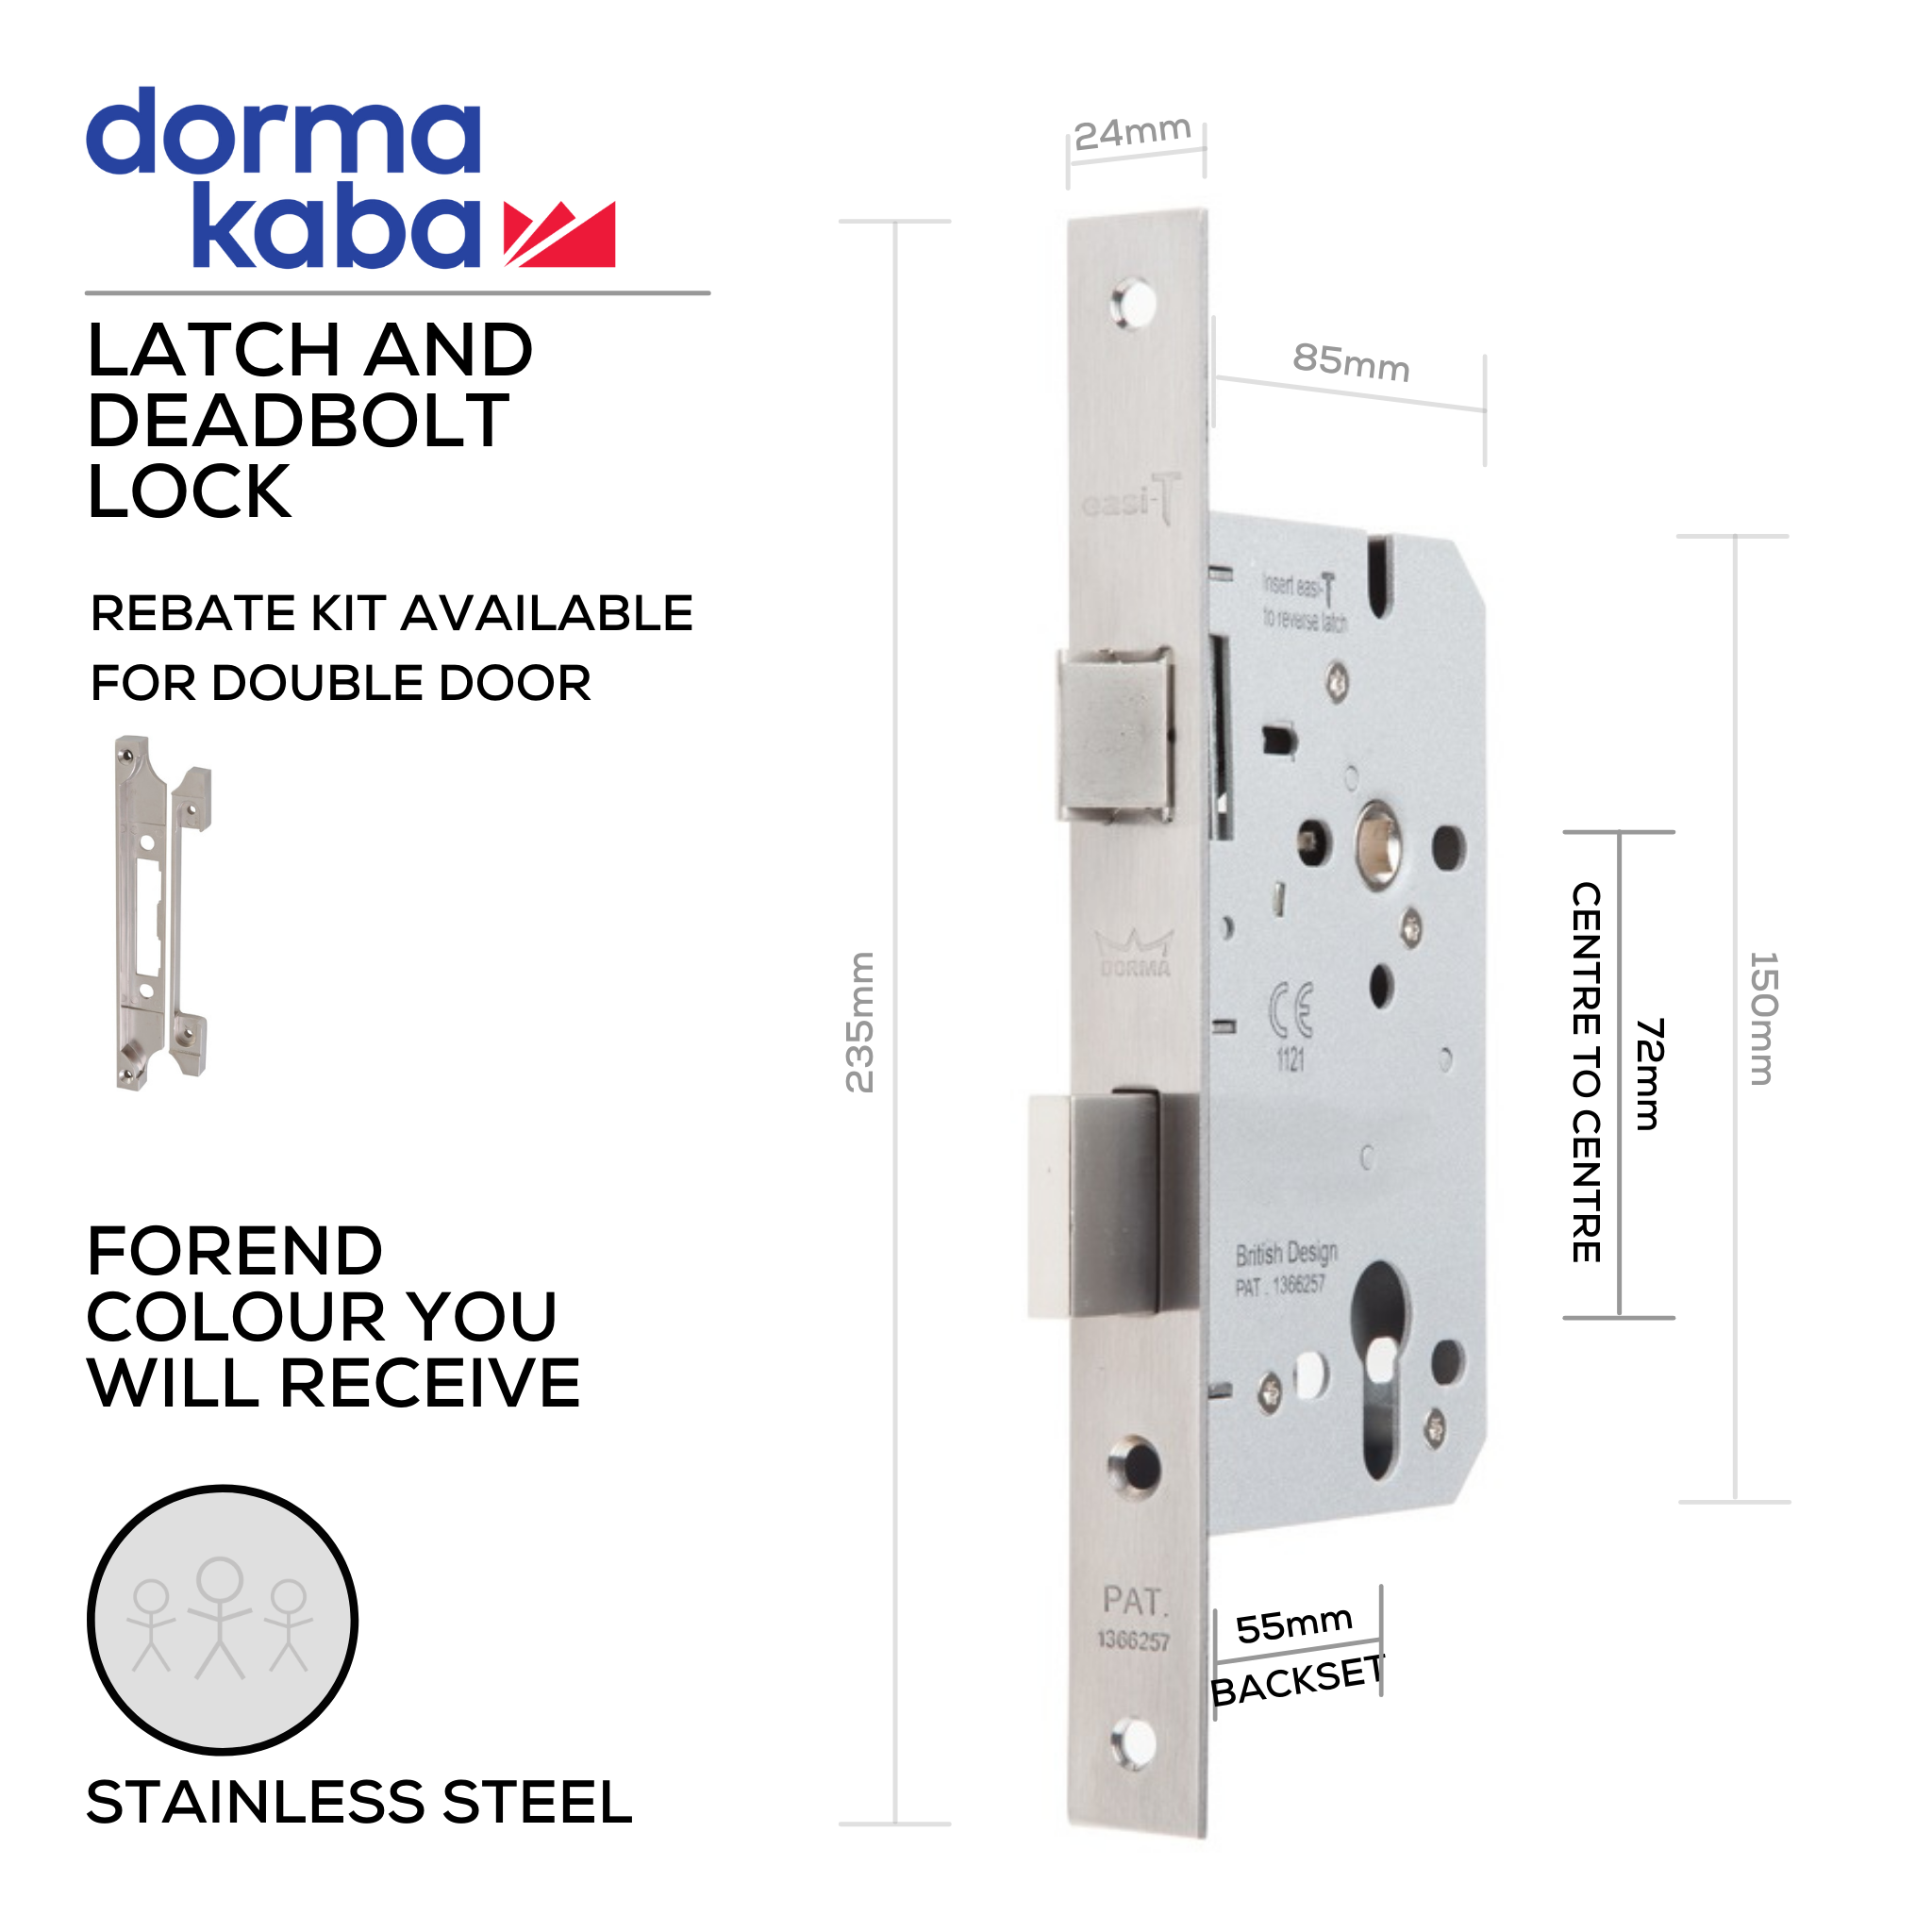 D072EC Stainless Steel, Latch & Deadbolt Lock, Euro Cylinder, Excluding Cylinder, 55mm (Backset) x 72mm (ctc), Stainless Steel, DORMAKABA